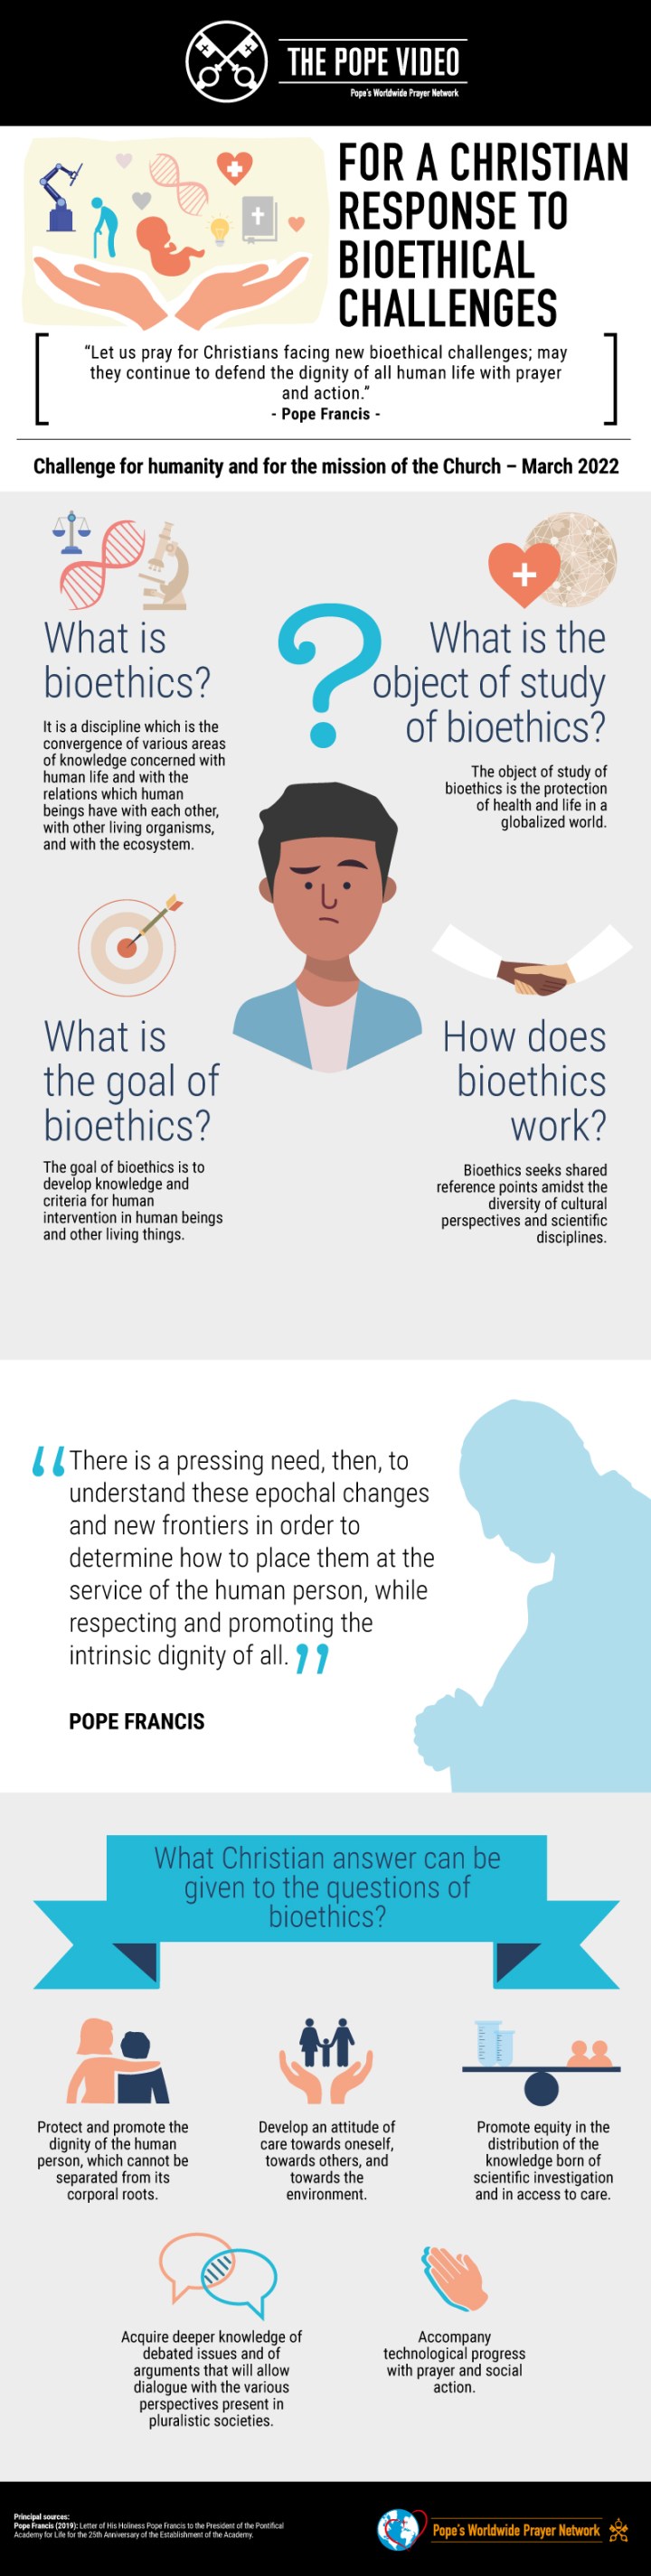 Infographic-TPV-3-2022-EN-For-a-Christian-response-to-bioethical-challenges.jpg